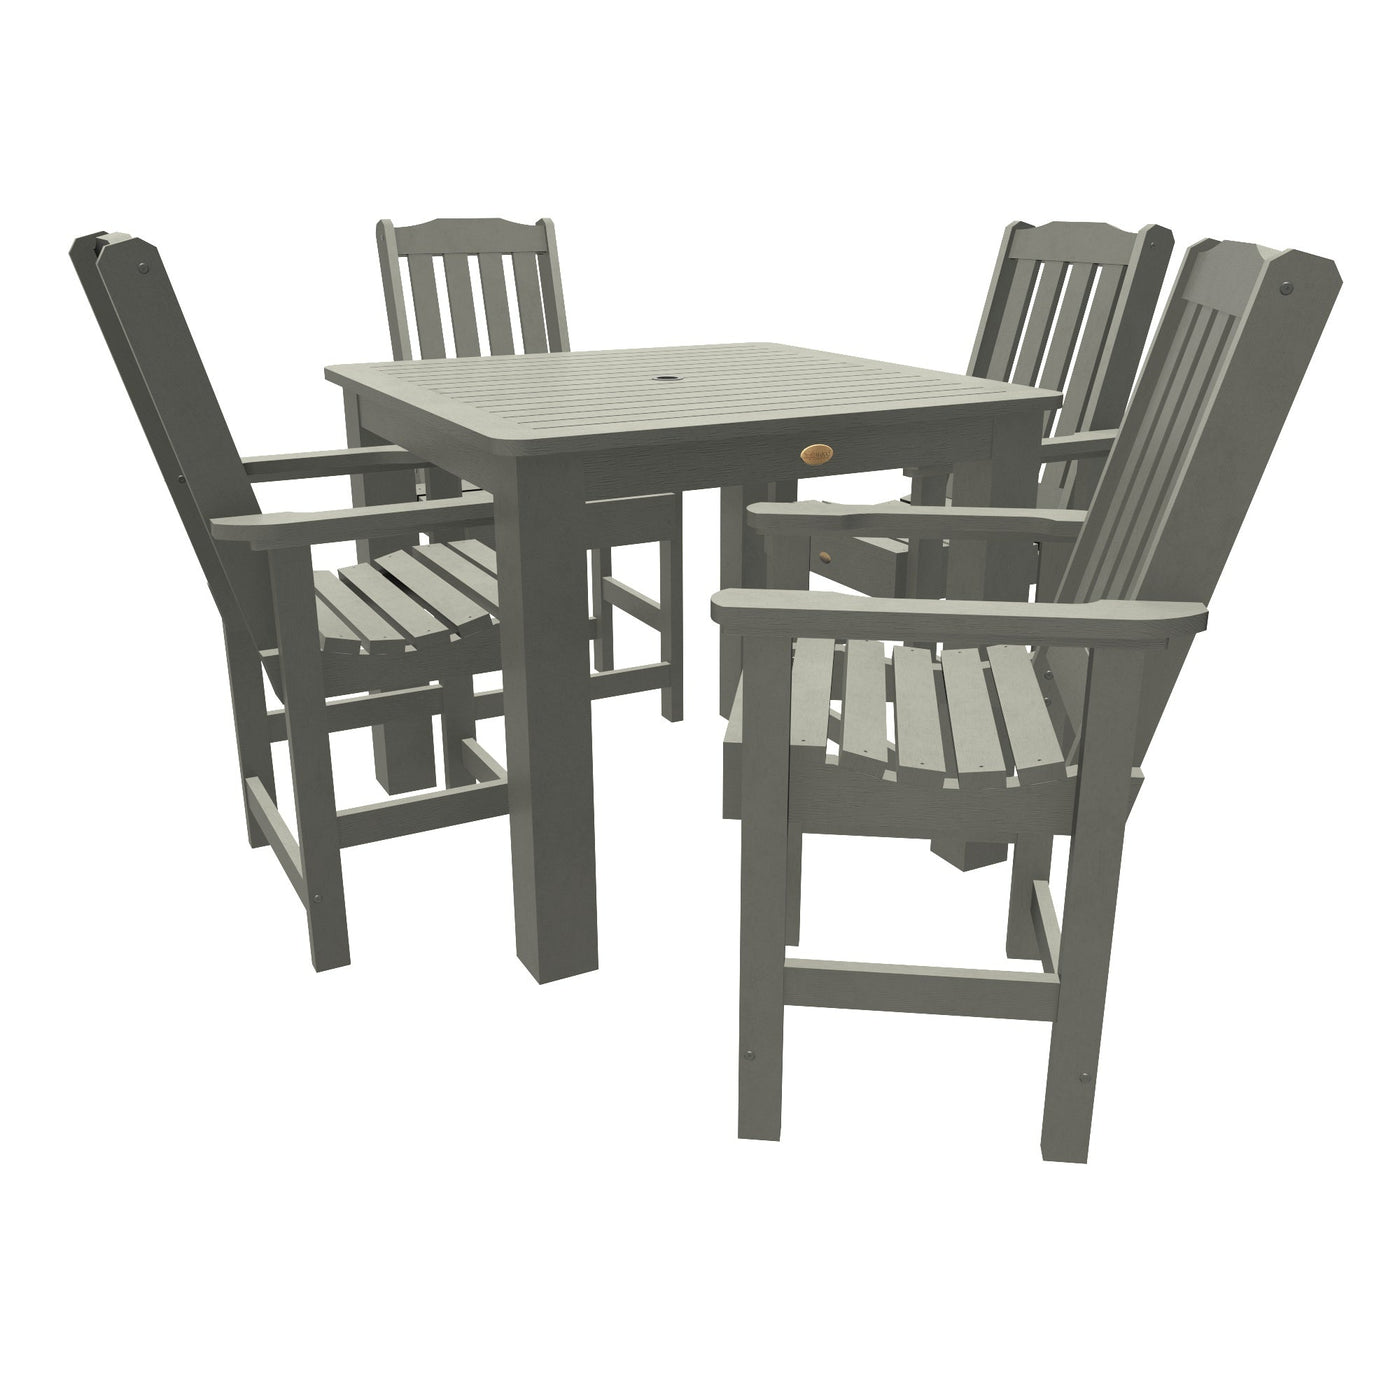 Lehigh 5pc Square Dining Set 42in x 42in - Counter Height Dining Highwood USA Coastal Teak 